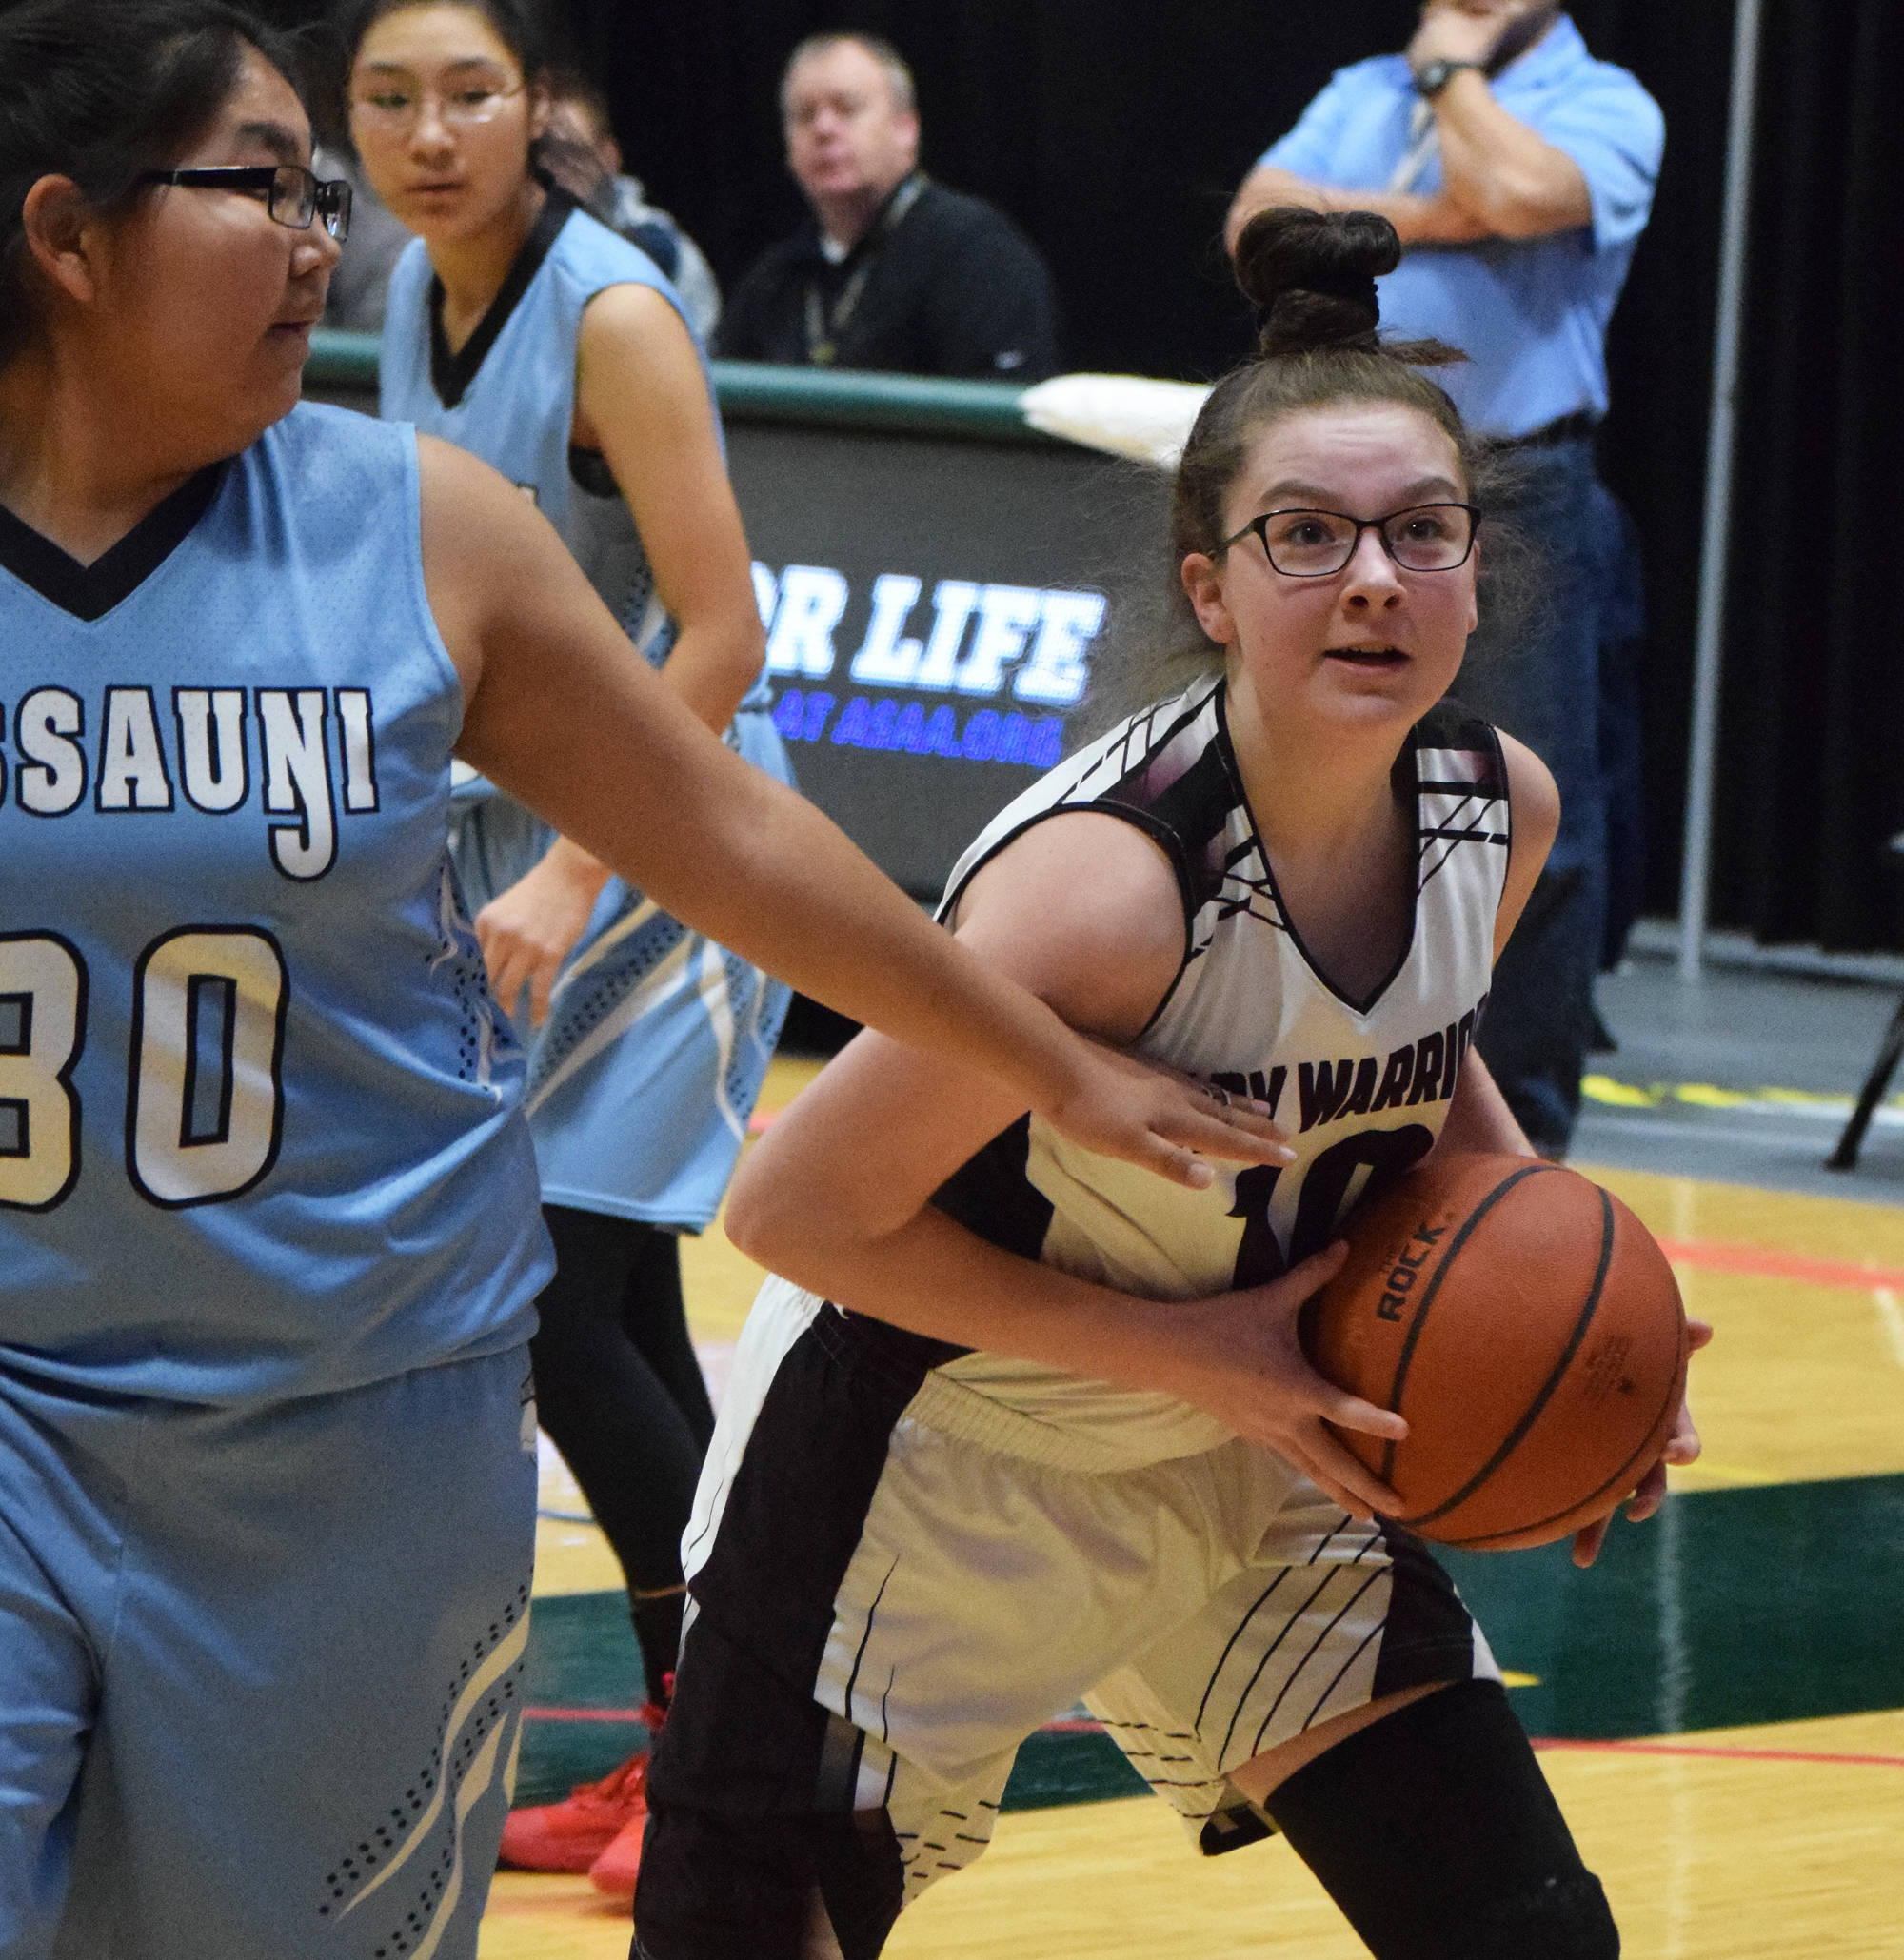 Nikolaevsk’s Zoya Fefelov (right) drives to the rim against Buckland’s Destiny Hadley Friday at the Class 1A state tournament at the Alaska Airlines Center in Anchorage. (Photo by Joey Klecka/Peninsula Clarion)